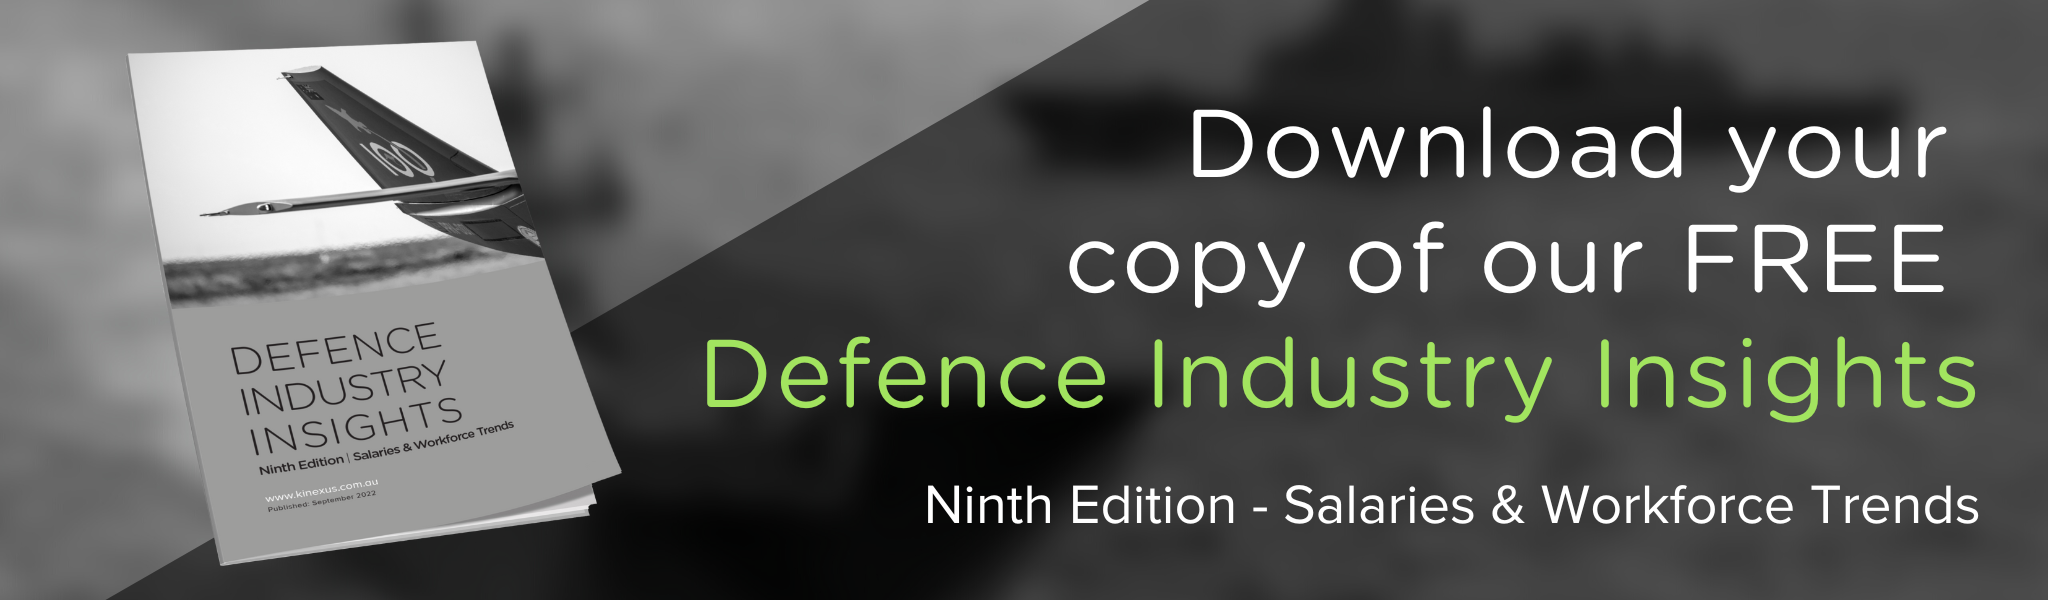 Defence industry insights ninth edition call to download